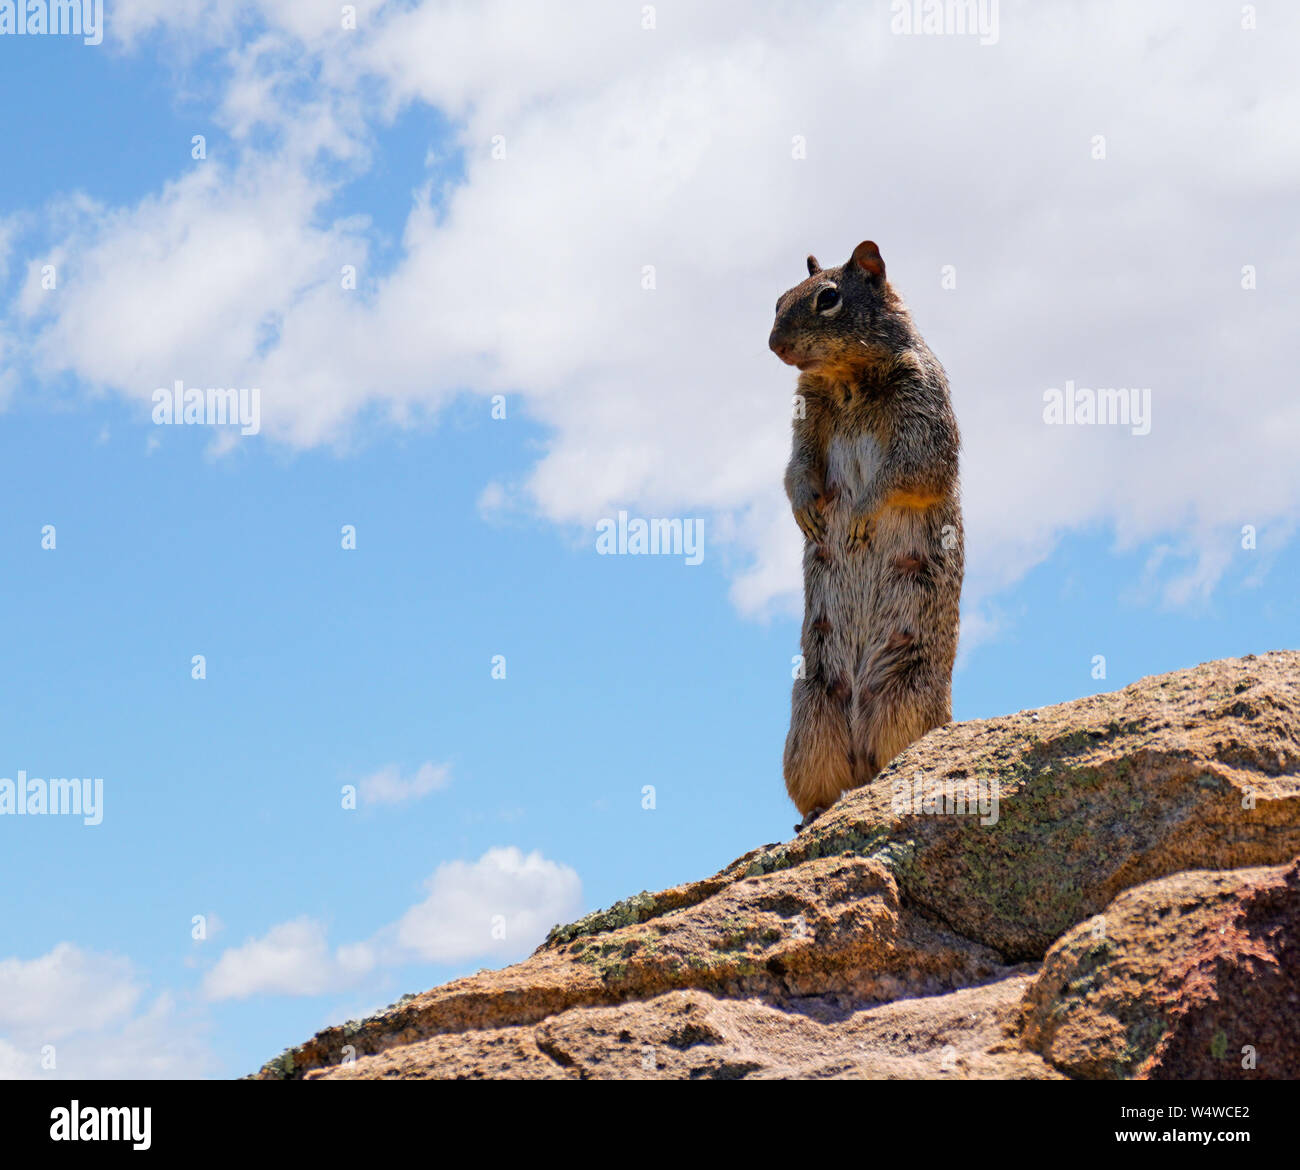 A Mama Desert Squirrel Stands on Her Hind Legs to Get a Better View Stock Photo